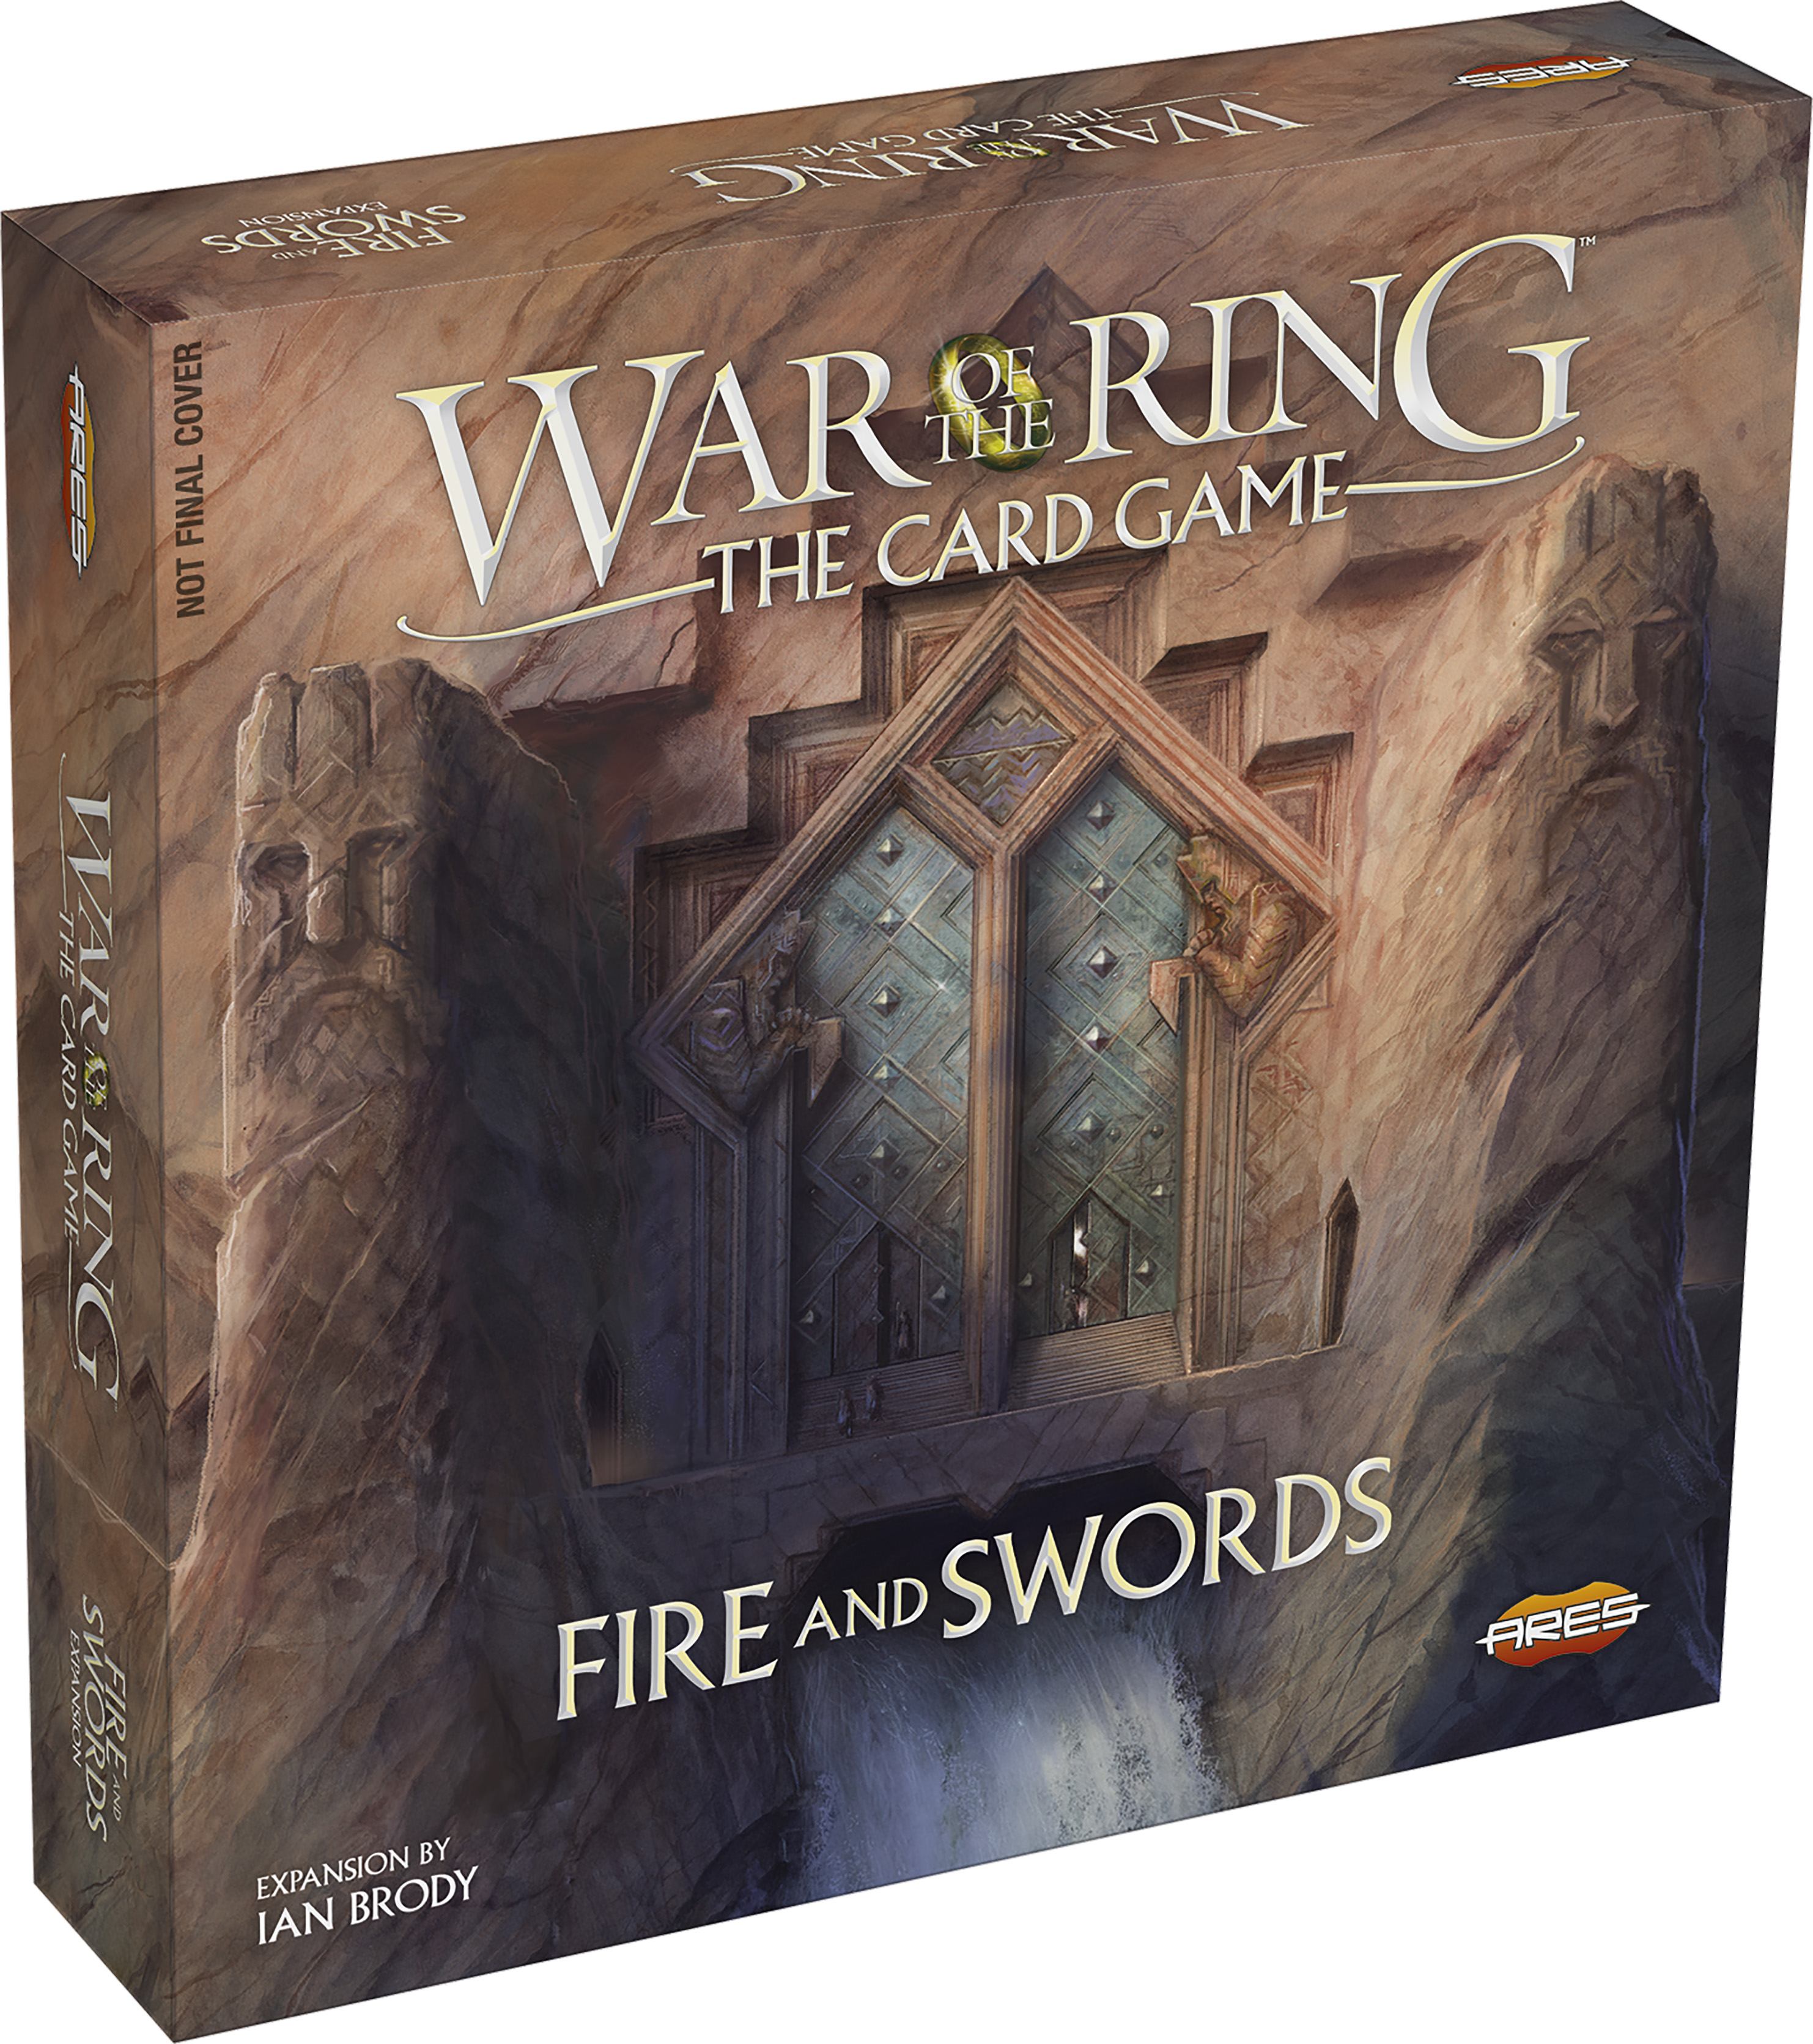 GTM #290 - War of the Ring TCG: Fire & Sword expansion